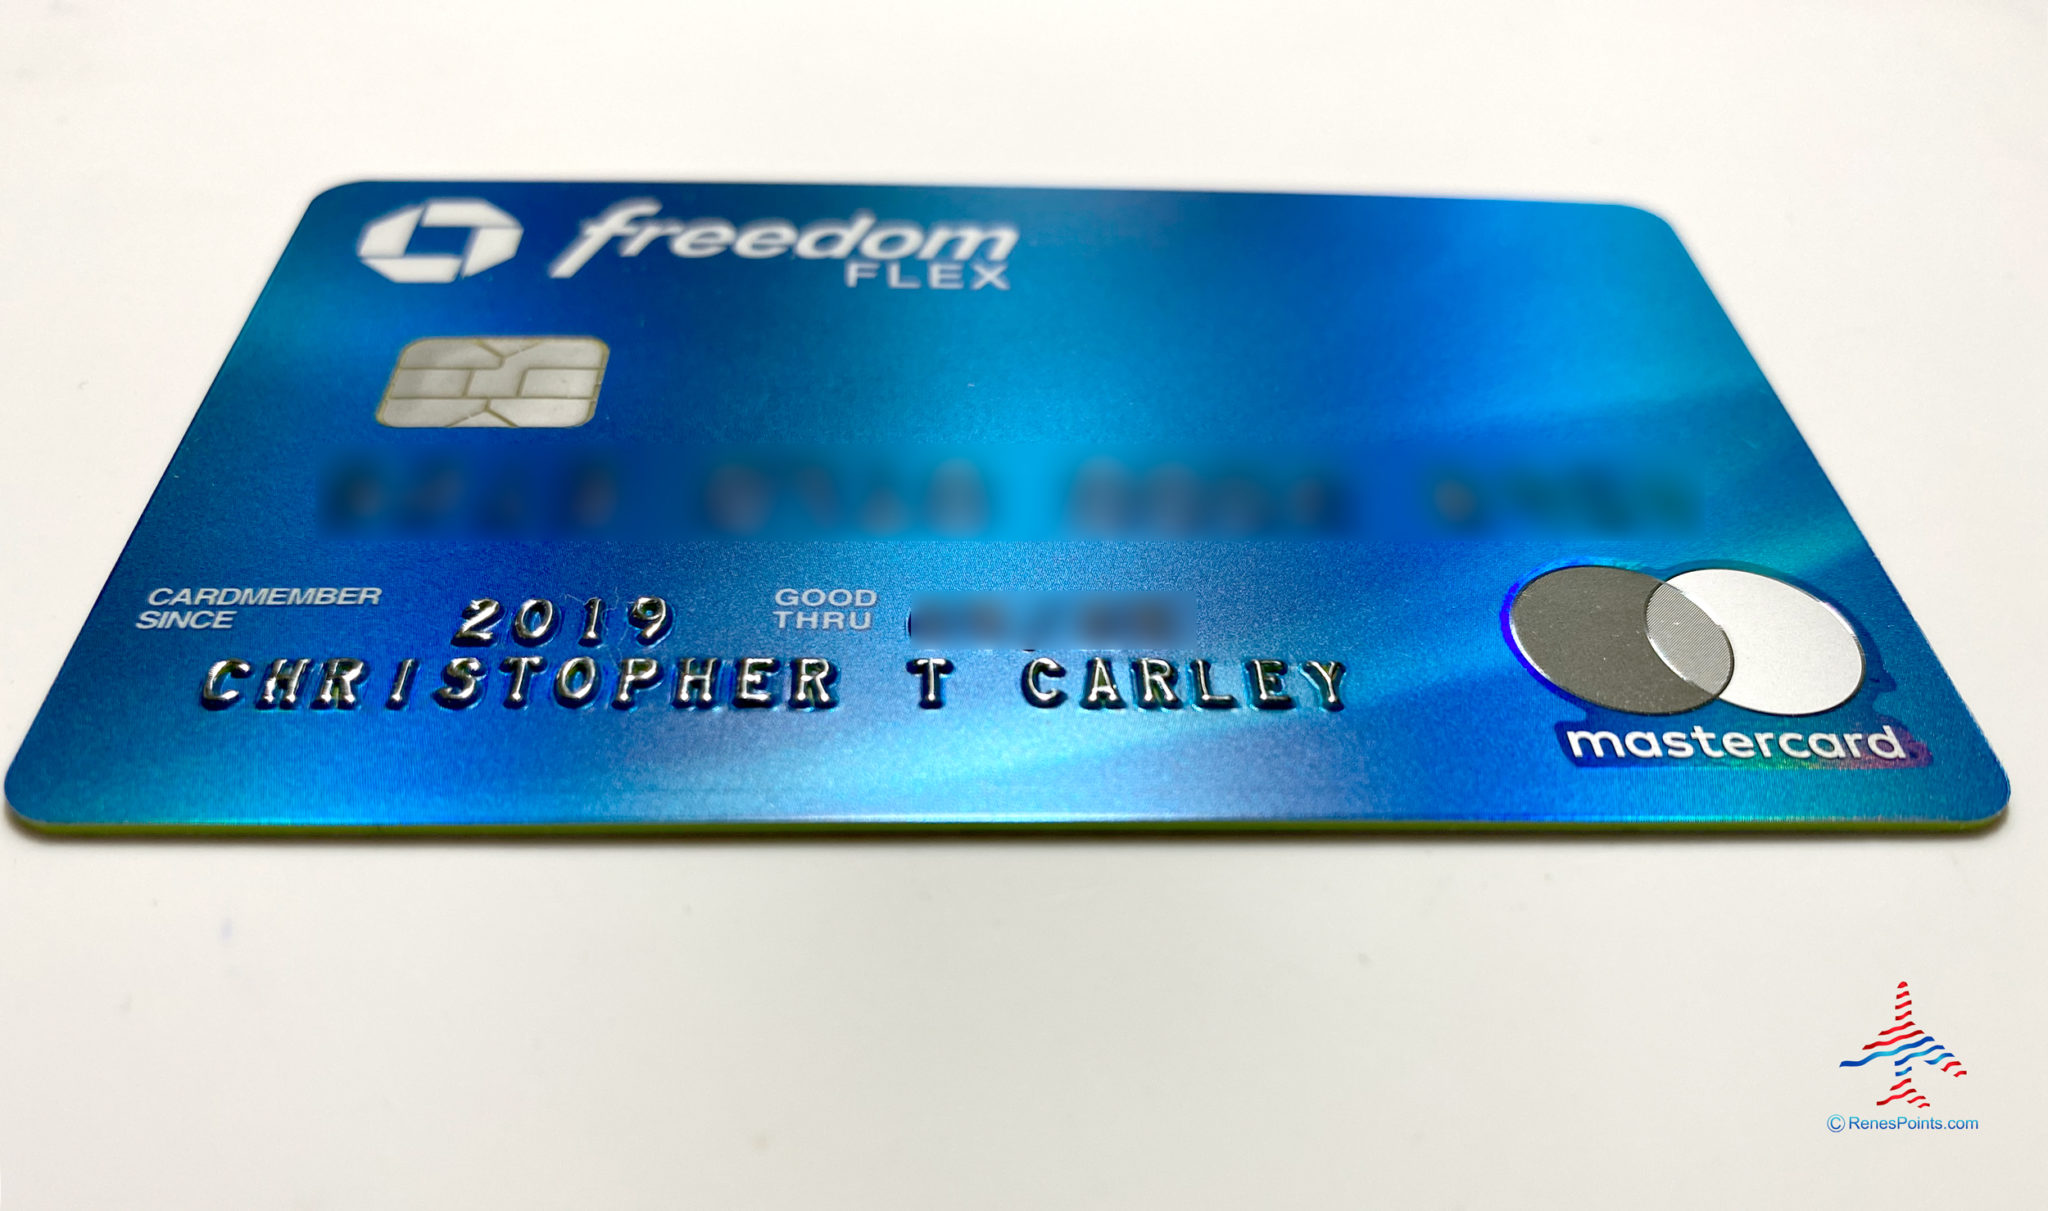 Our First Look: Chase Freedom Flex℠ Mastercard - Eye of the Flyer